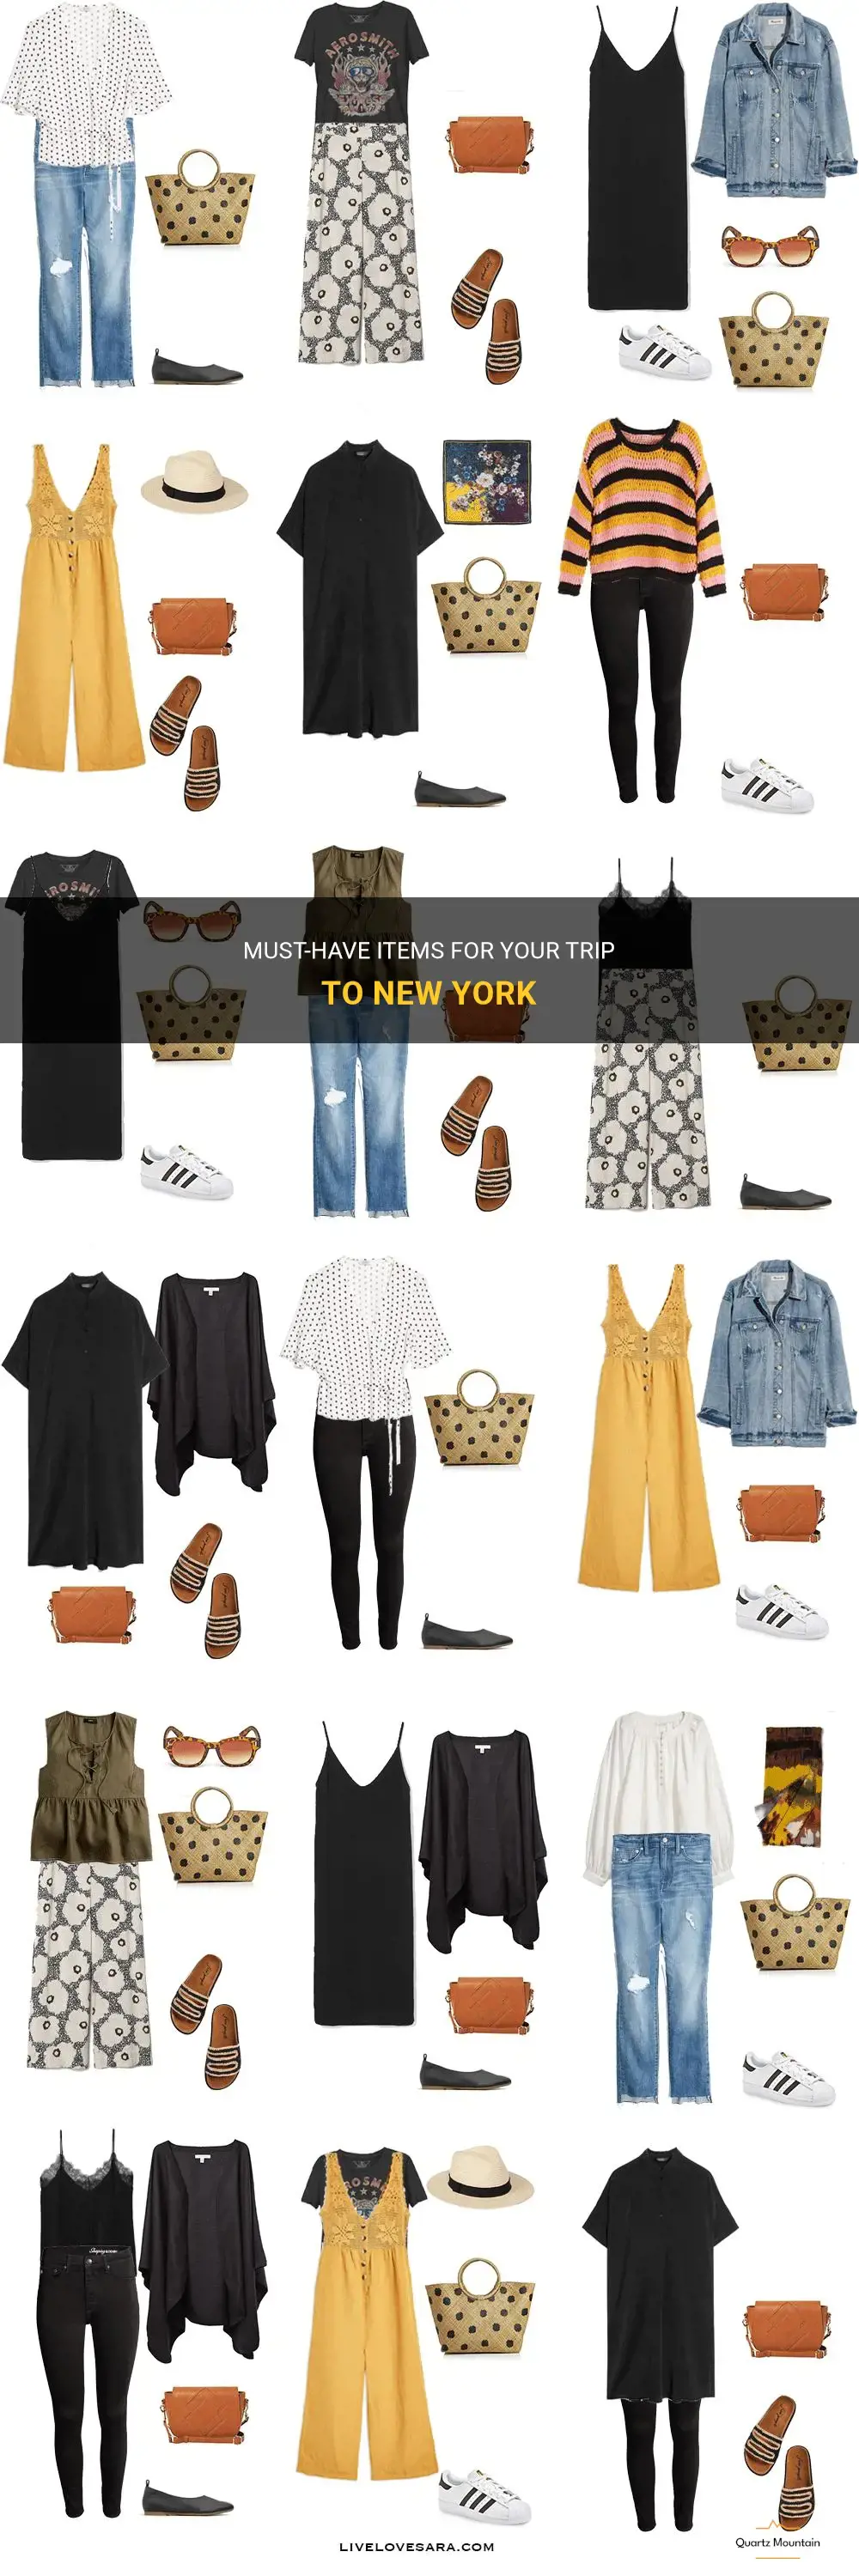 what to pack for my trip to new york